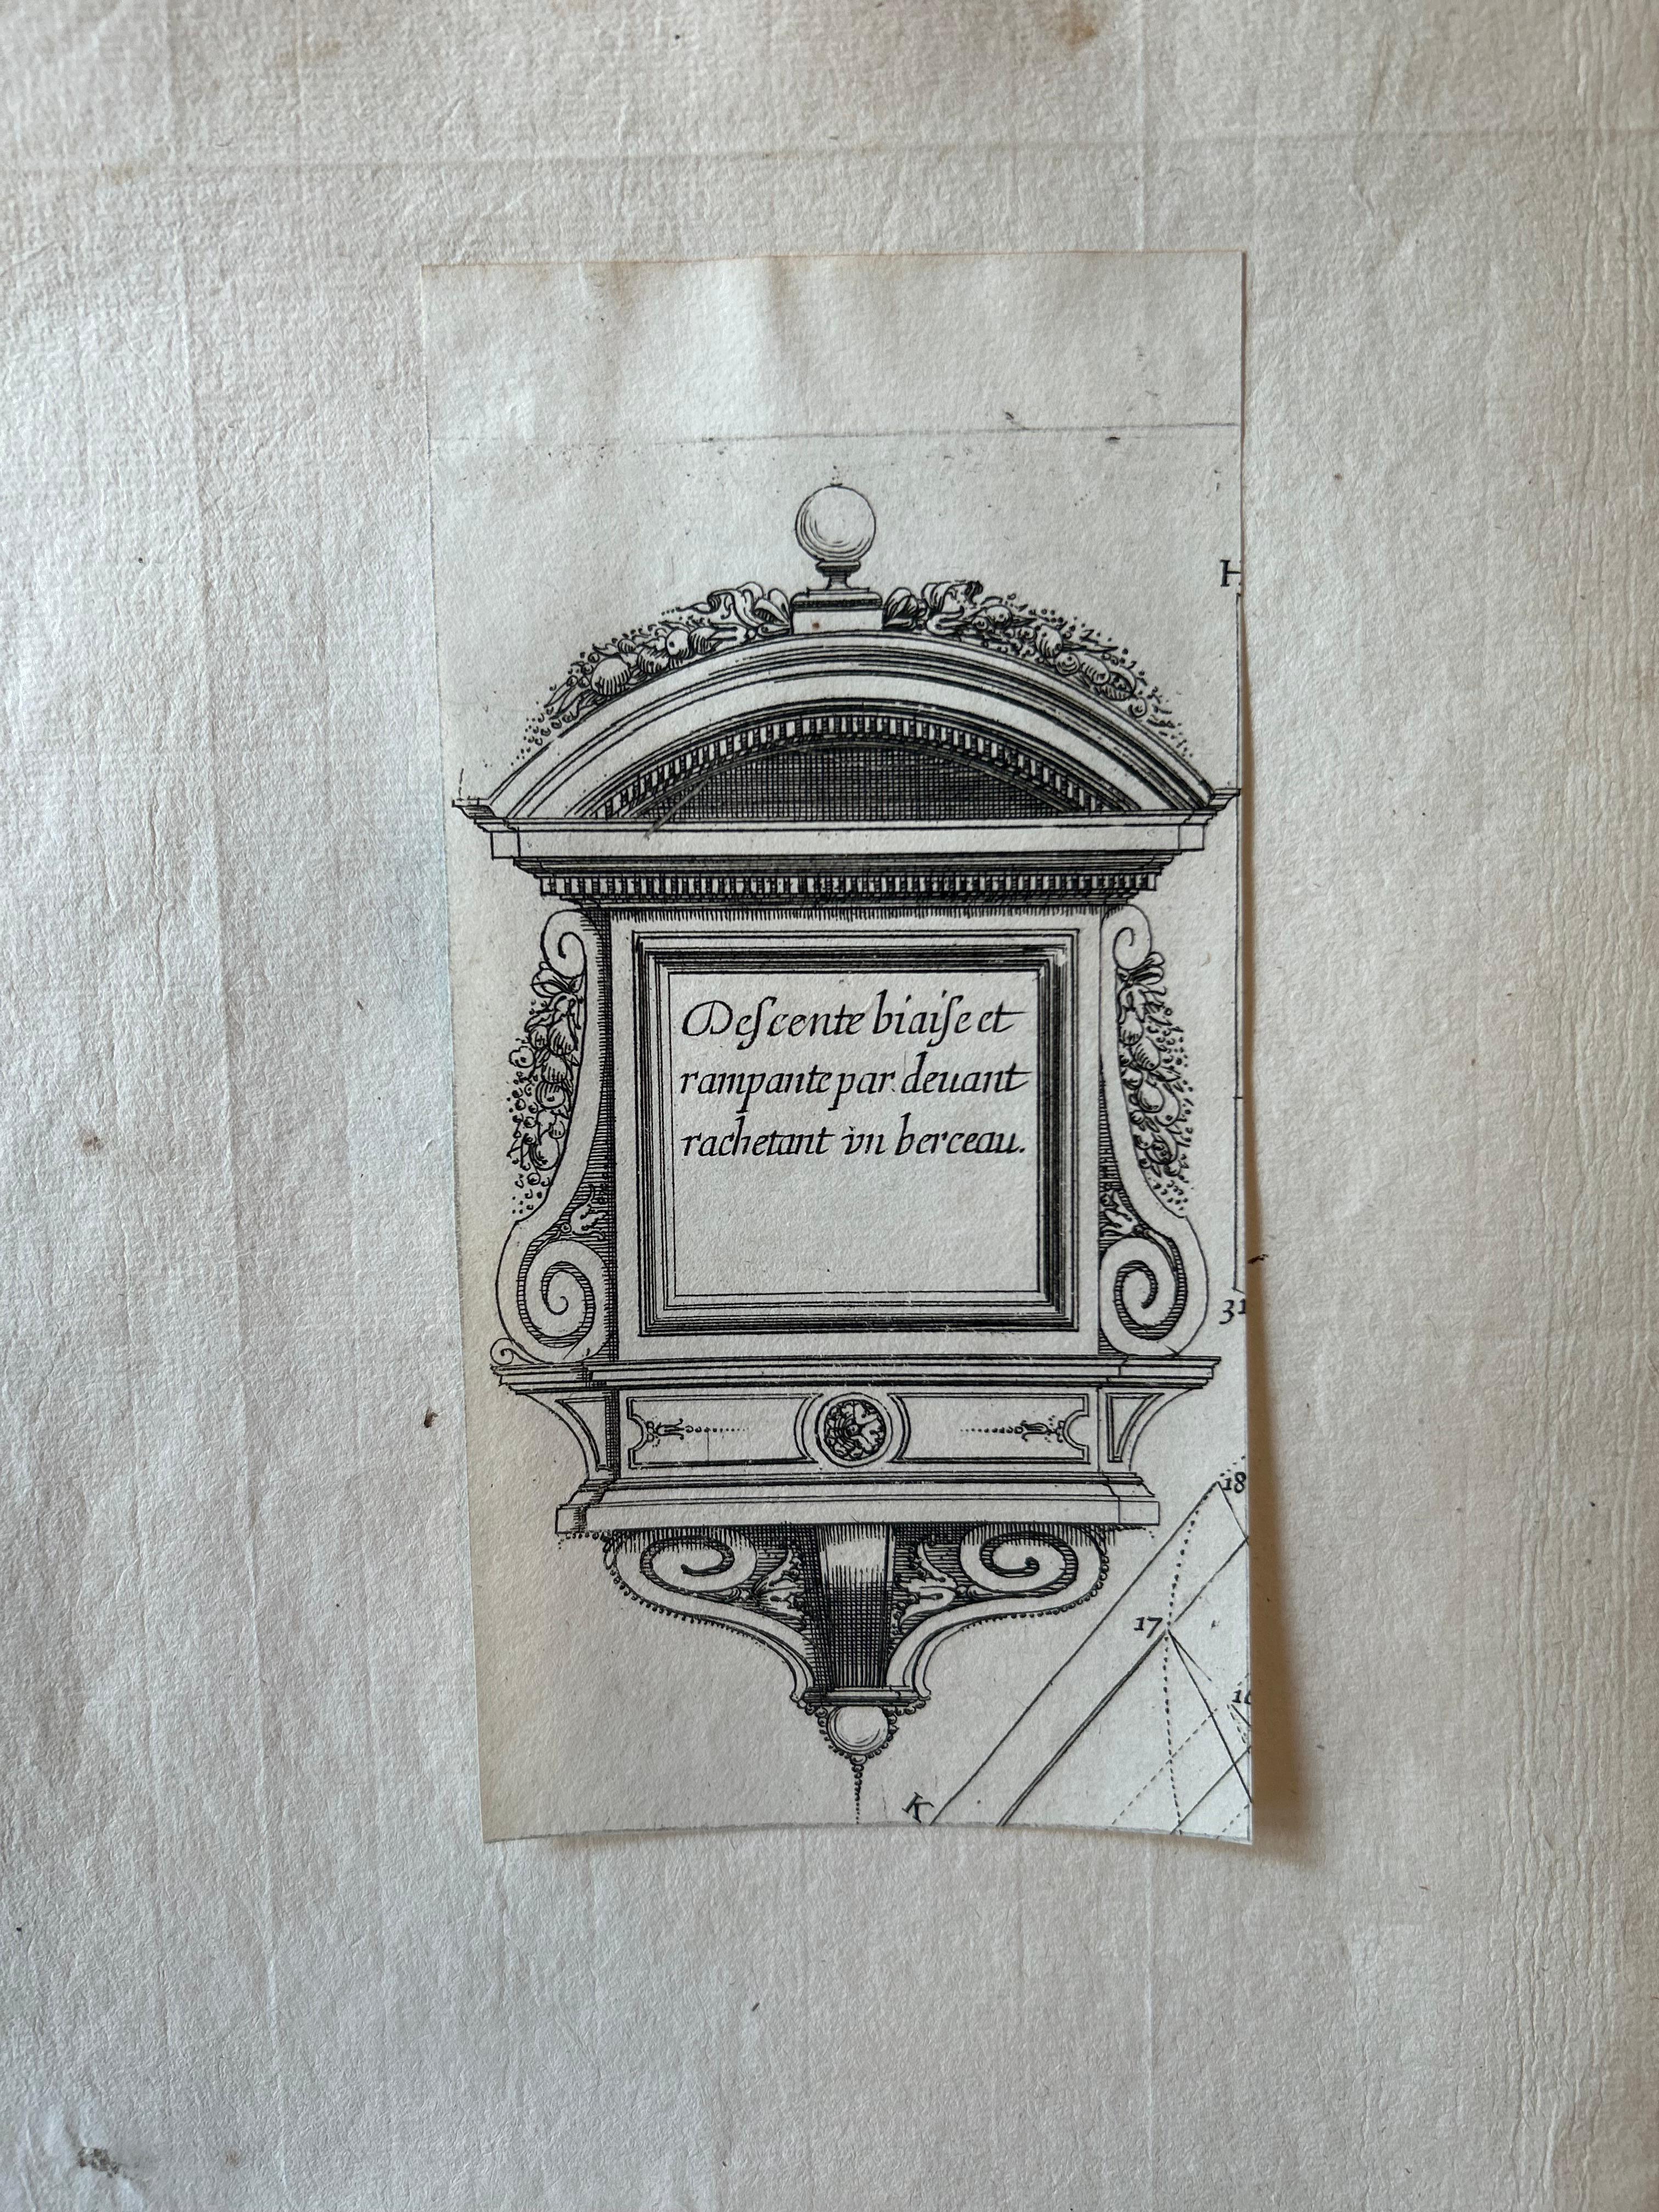 Engraved Set of Twelve 18th century Printer's Devices For Sale